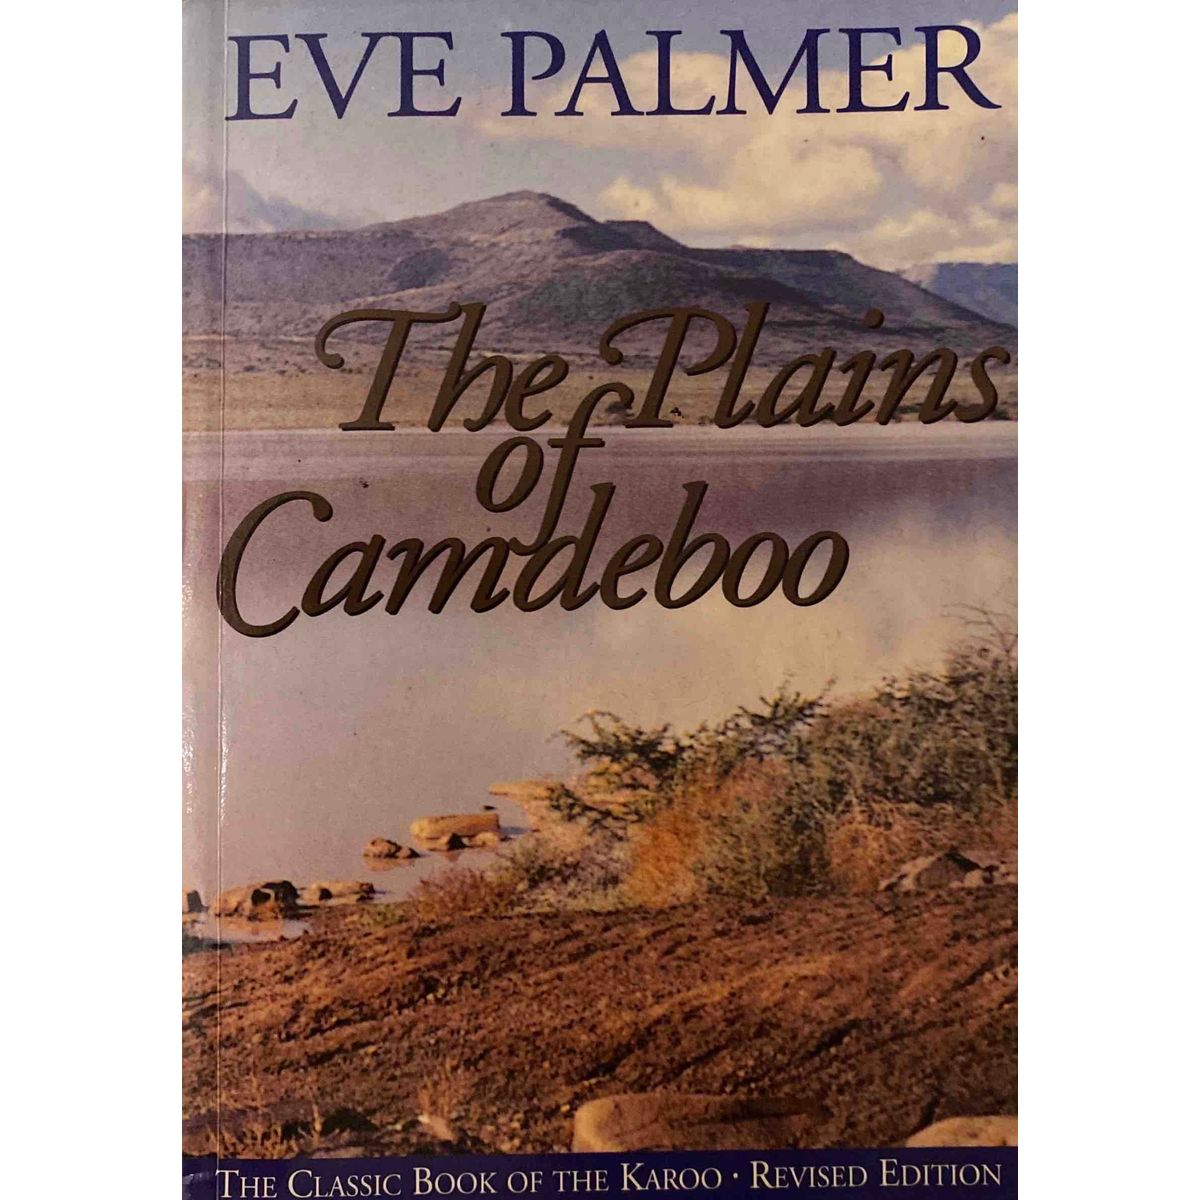 ISBN: 9781868422104 / 1868422100 - The Plains of Camdeboo: The Classic Book of the Karoo by Eve Palmer [2004]